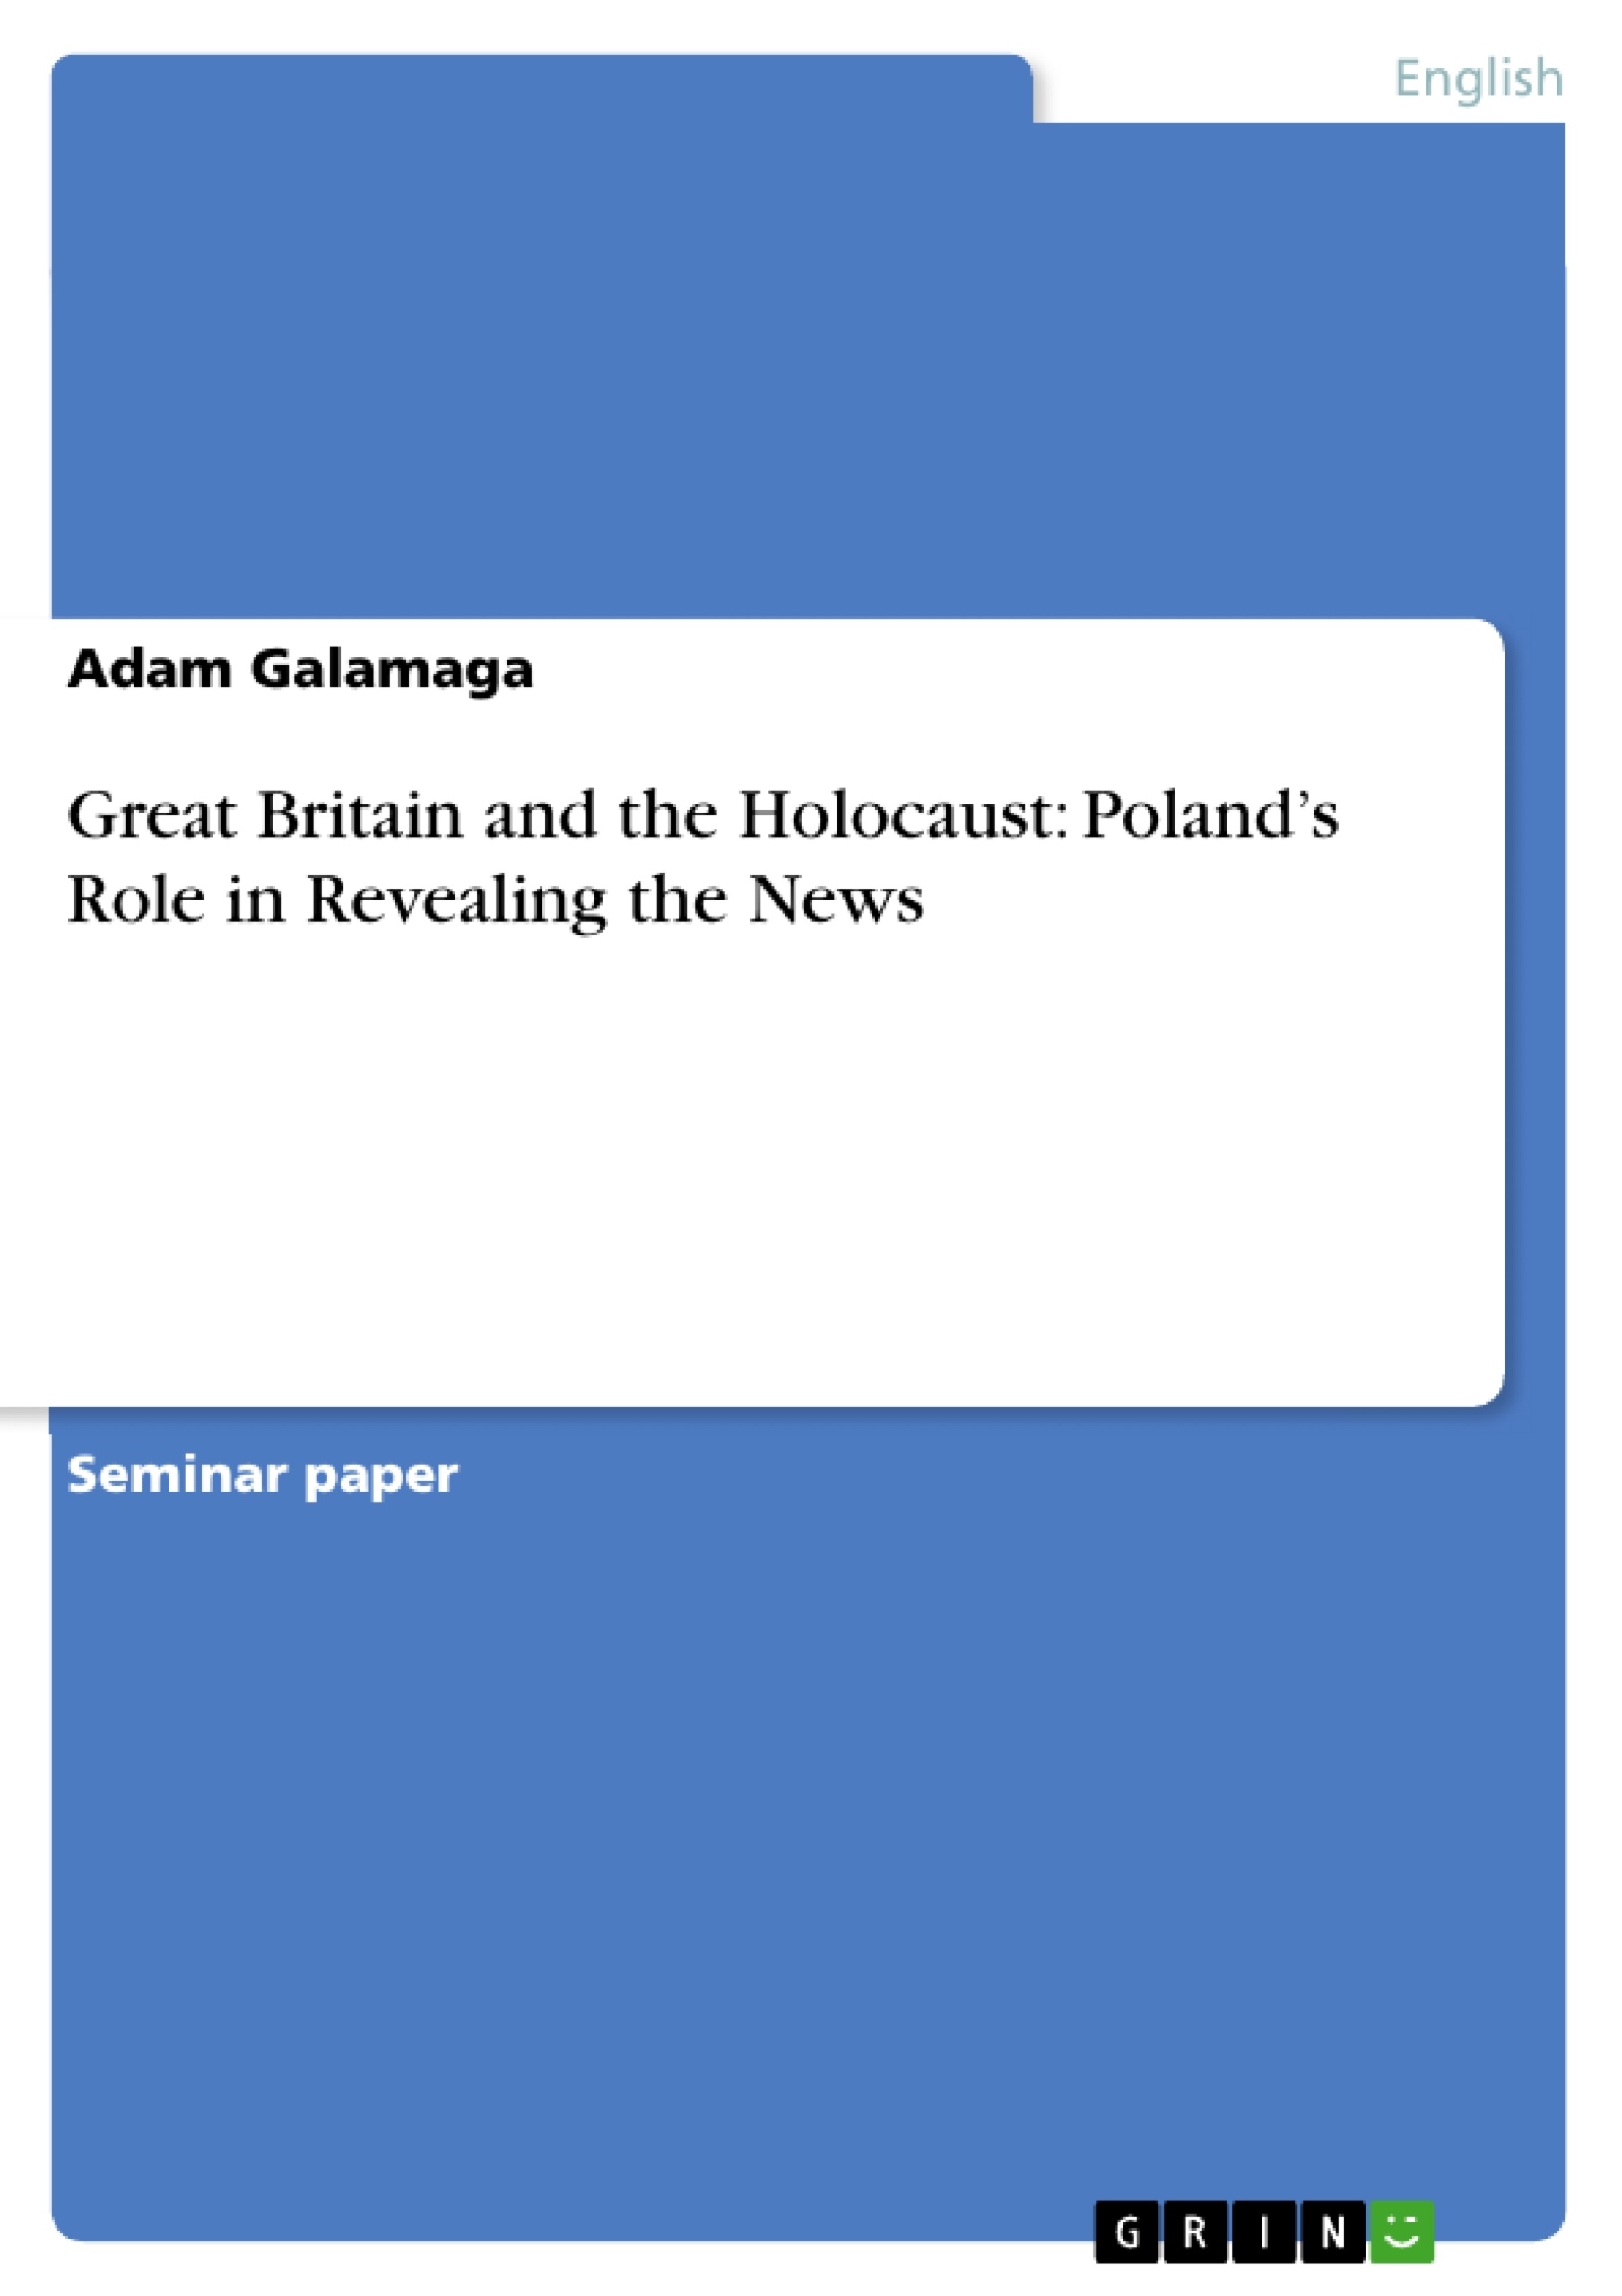 Title: Great Britain and the Holocaust: Poland’s Role in Revealing the News